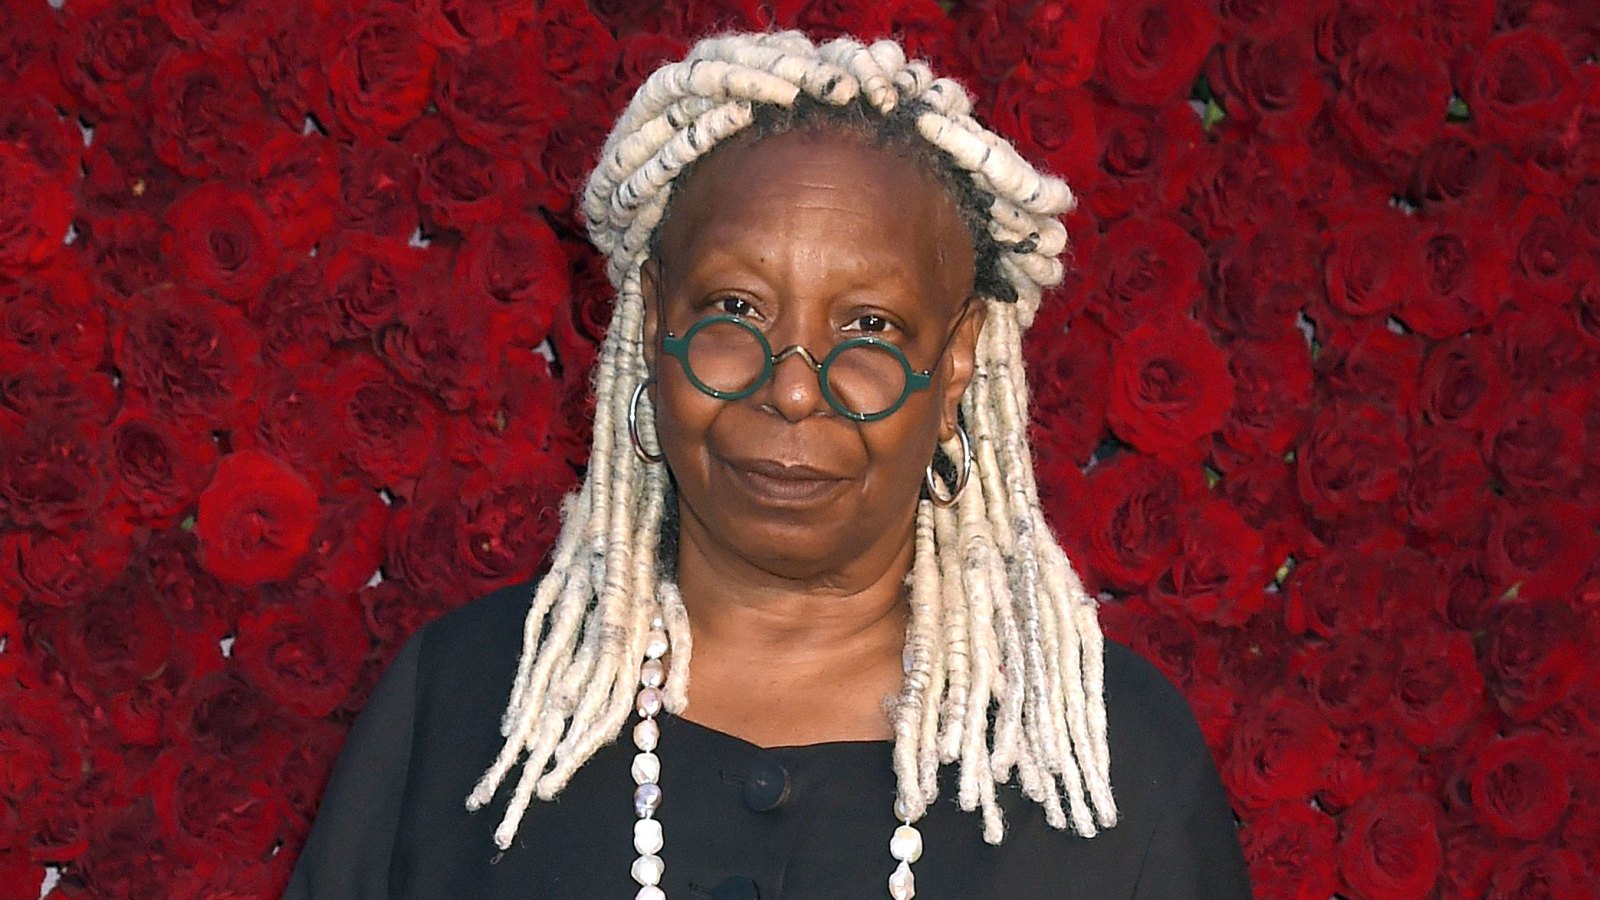 Whoopi Goldberg Returns to The View Promises to Keep Having Tough Conversations After Controversial Holocaust Comment